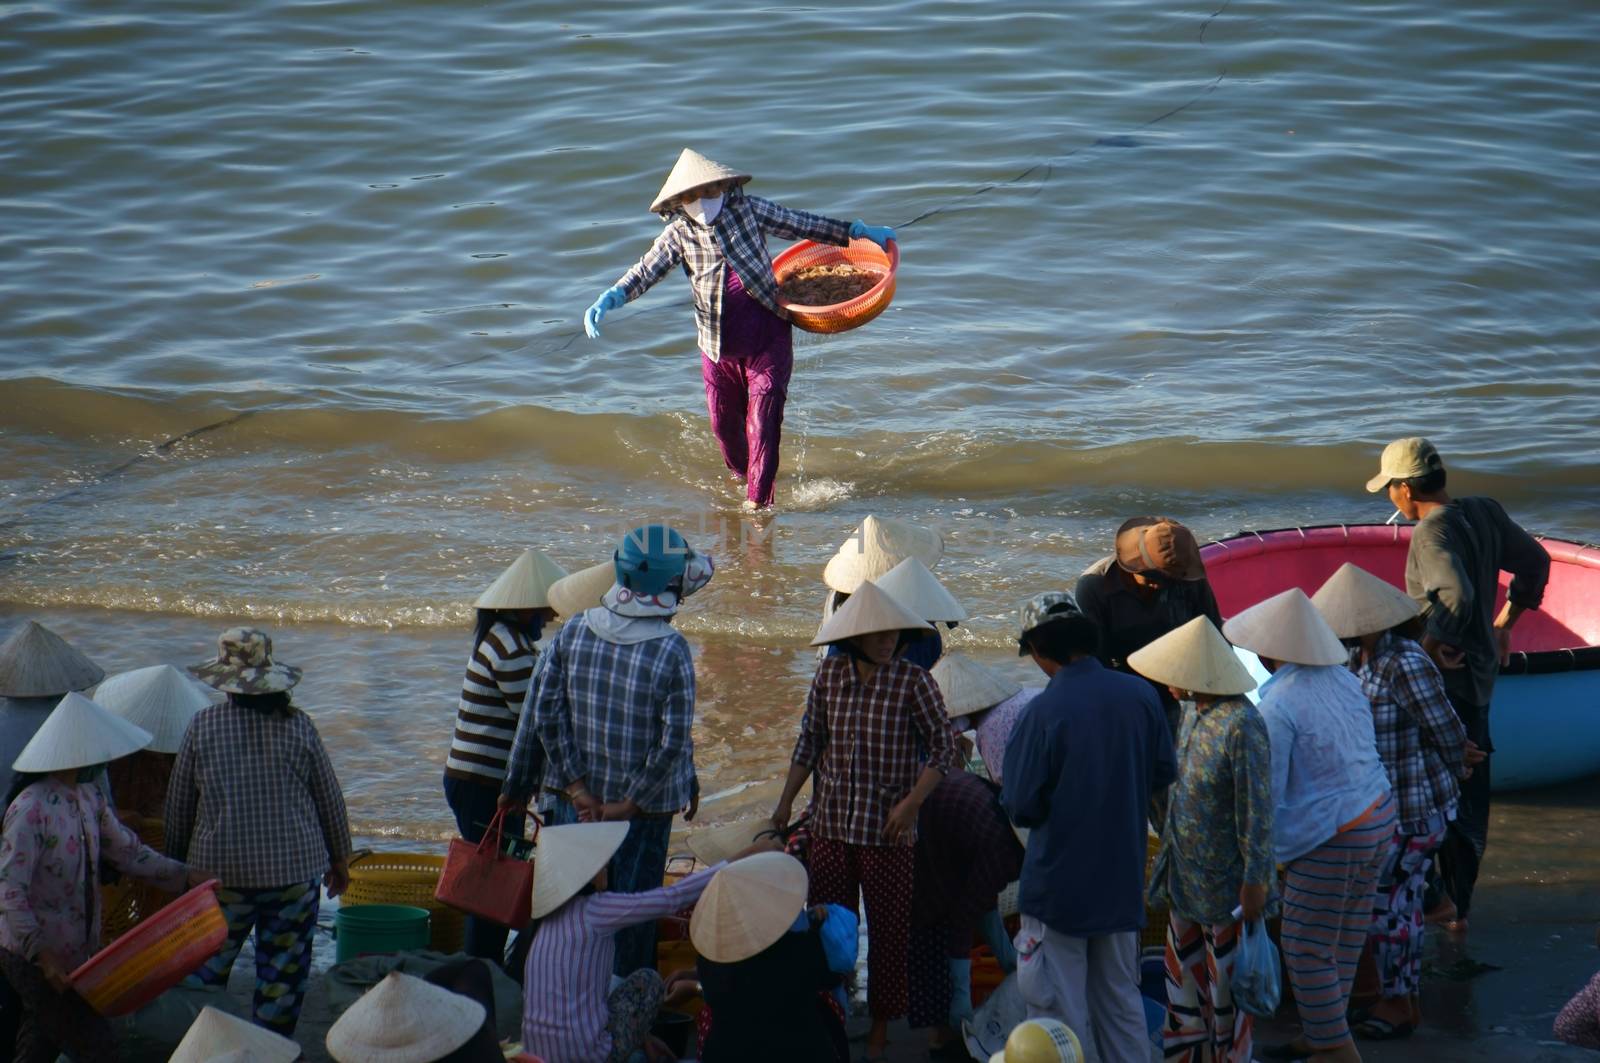 PHAN THIET, VIET NAM- FEB 3: Crowd of people make deal with fish at seashore in Phan Thiet, Viet Nam on Feb 3, 2013